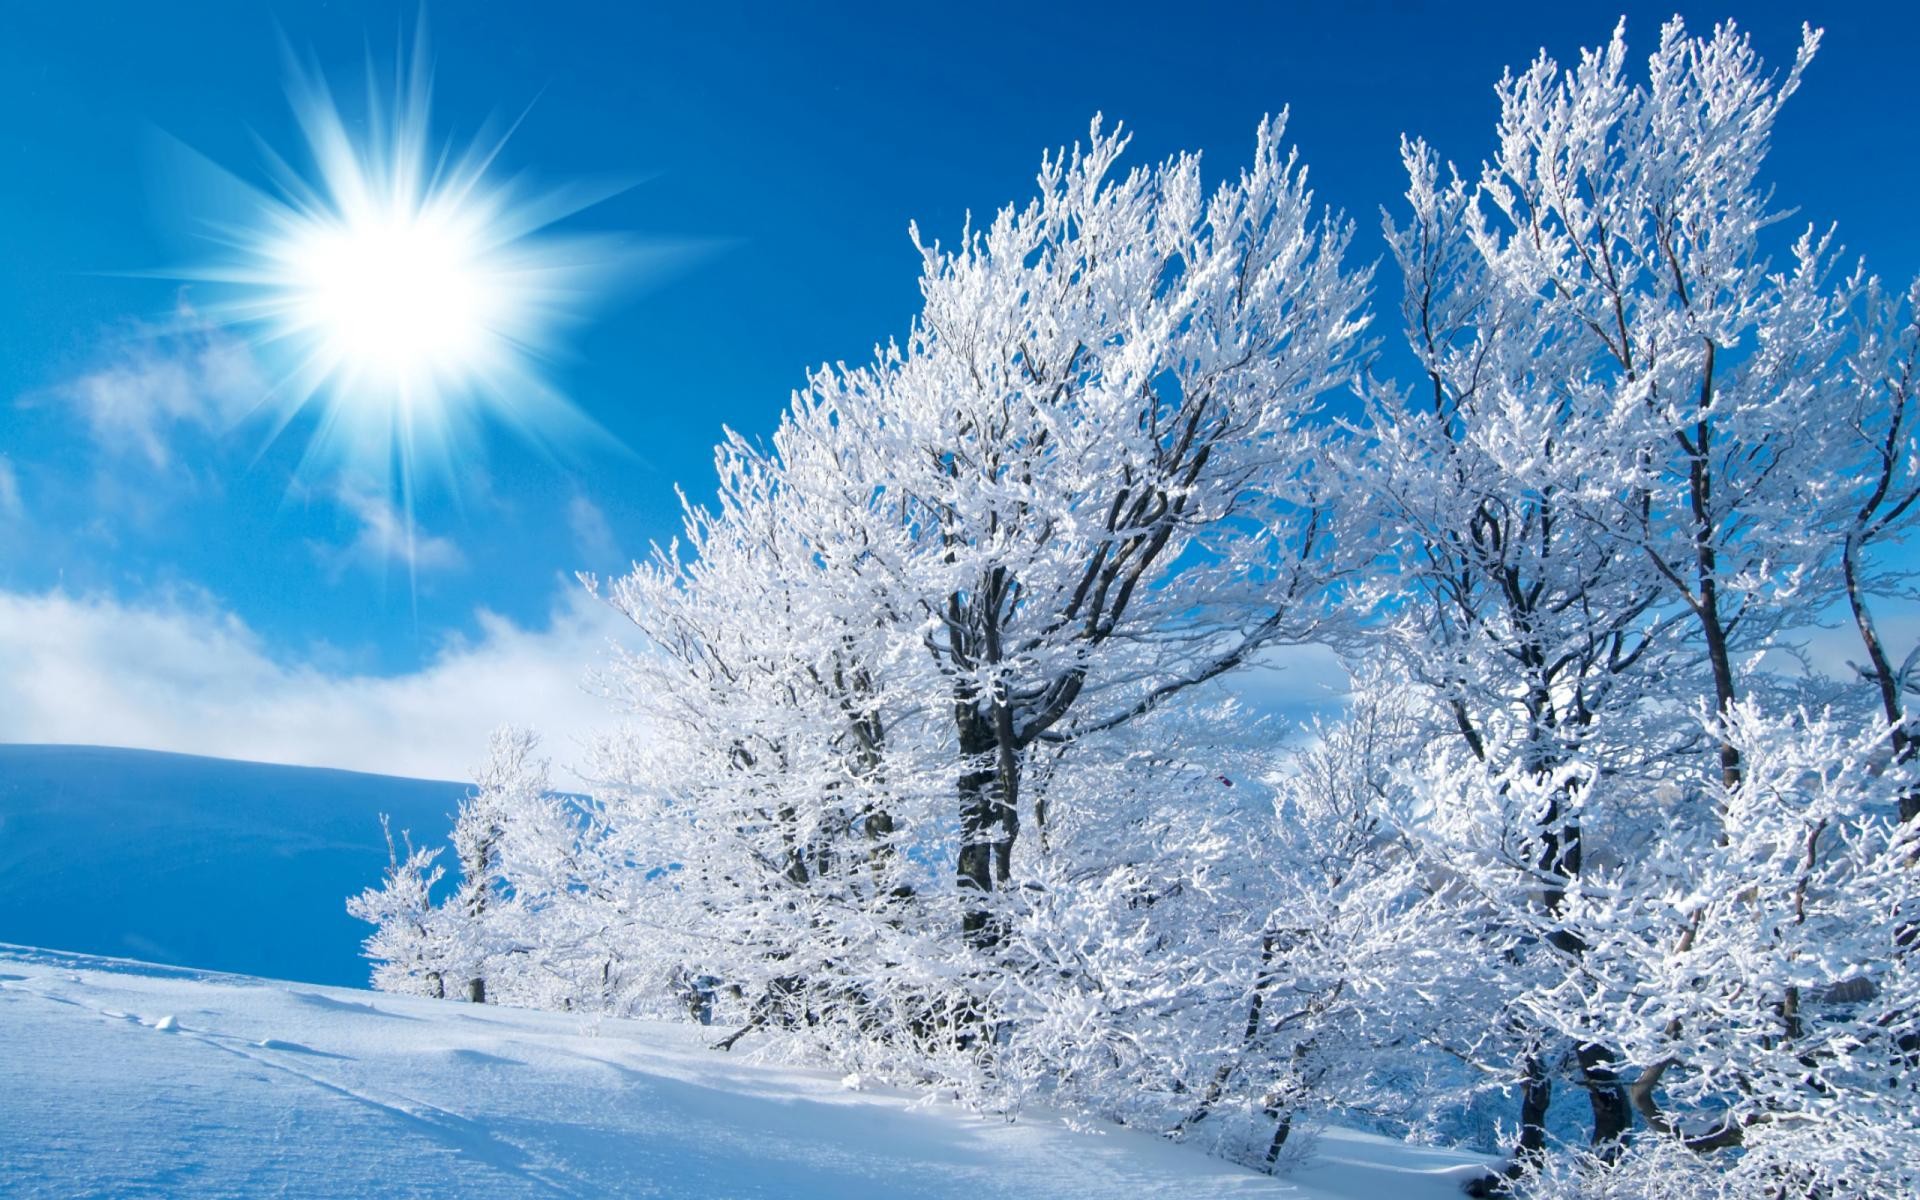 Free download Sunny winter landscape wallpapers and images